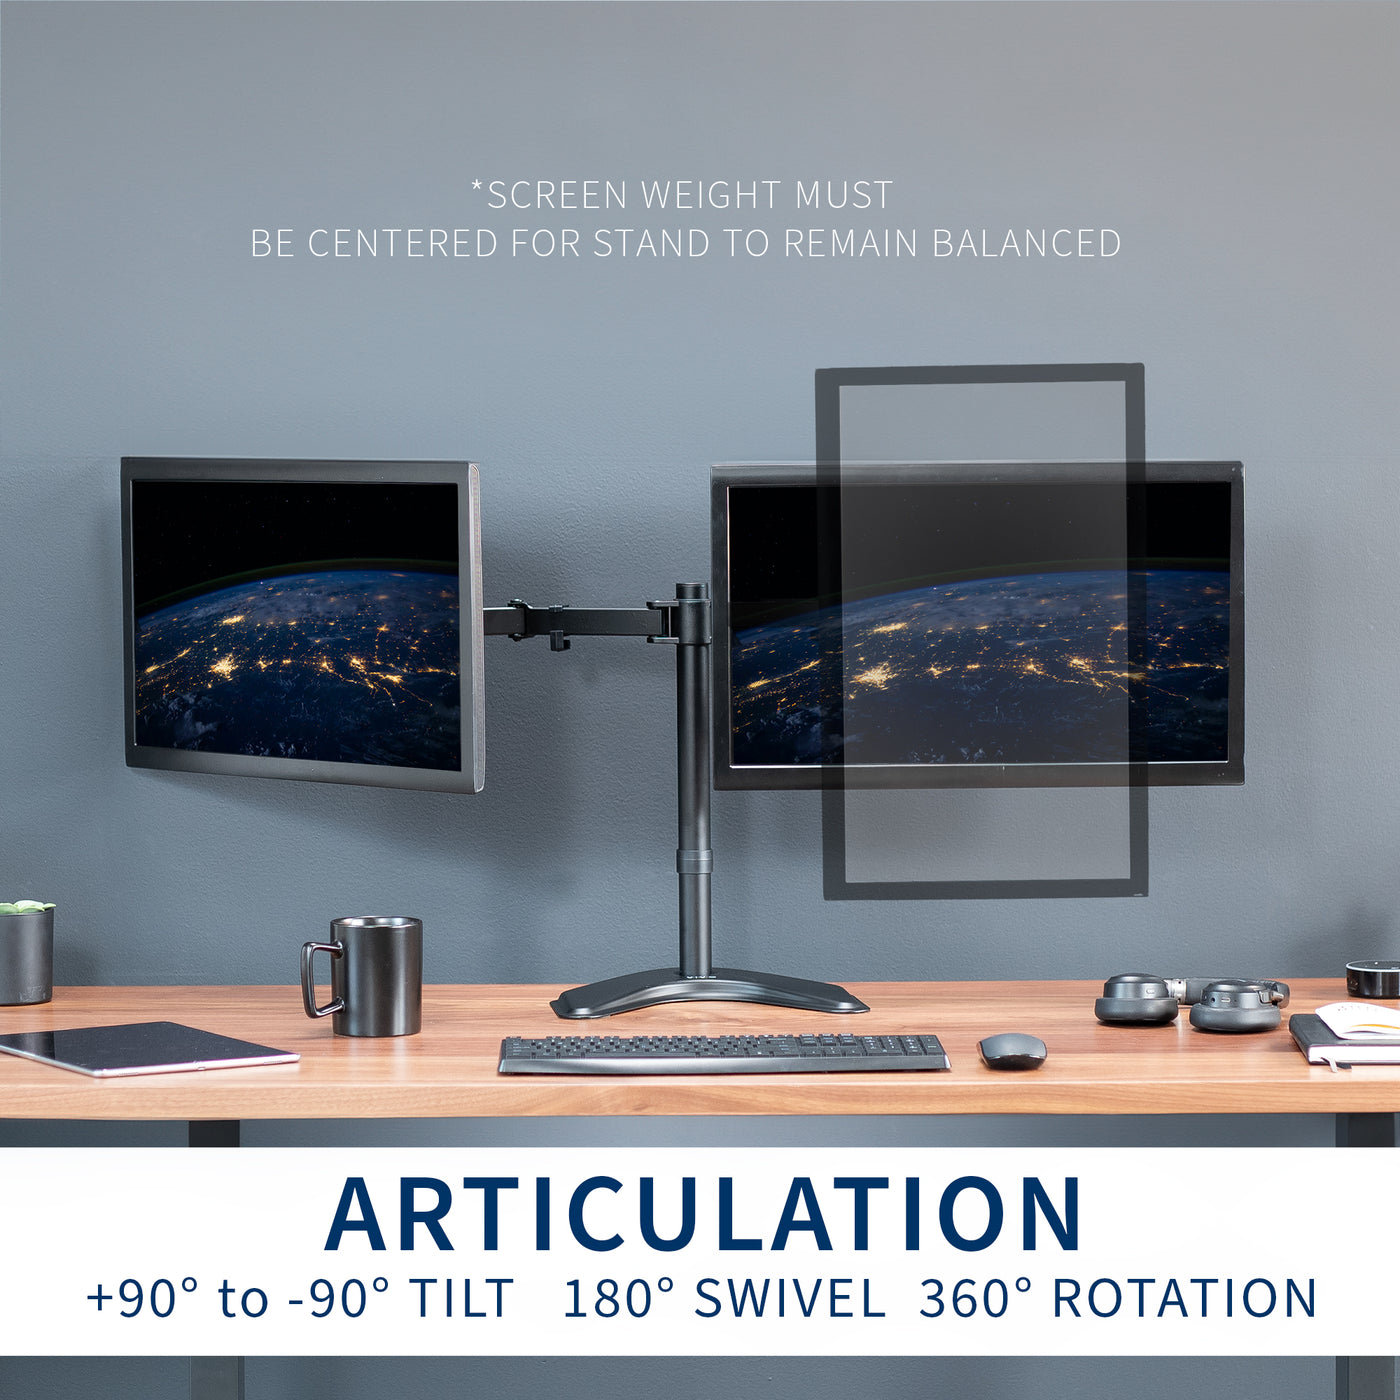 Height adjustable and integrated cable management with tilt, swivel, and rotation capabilities.